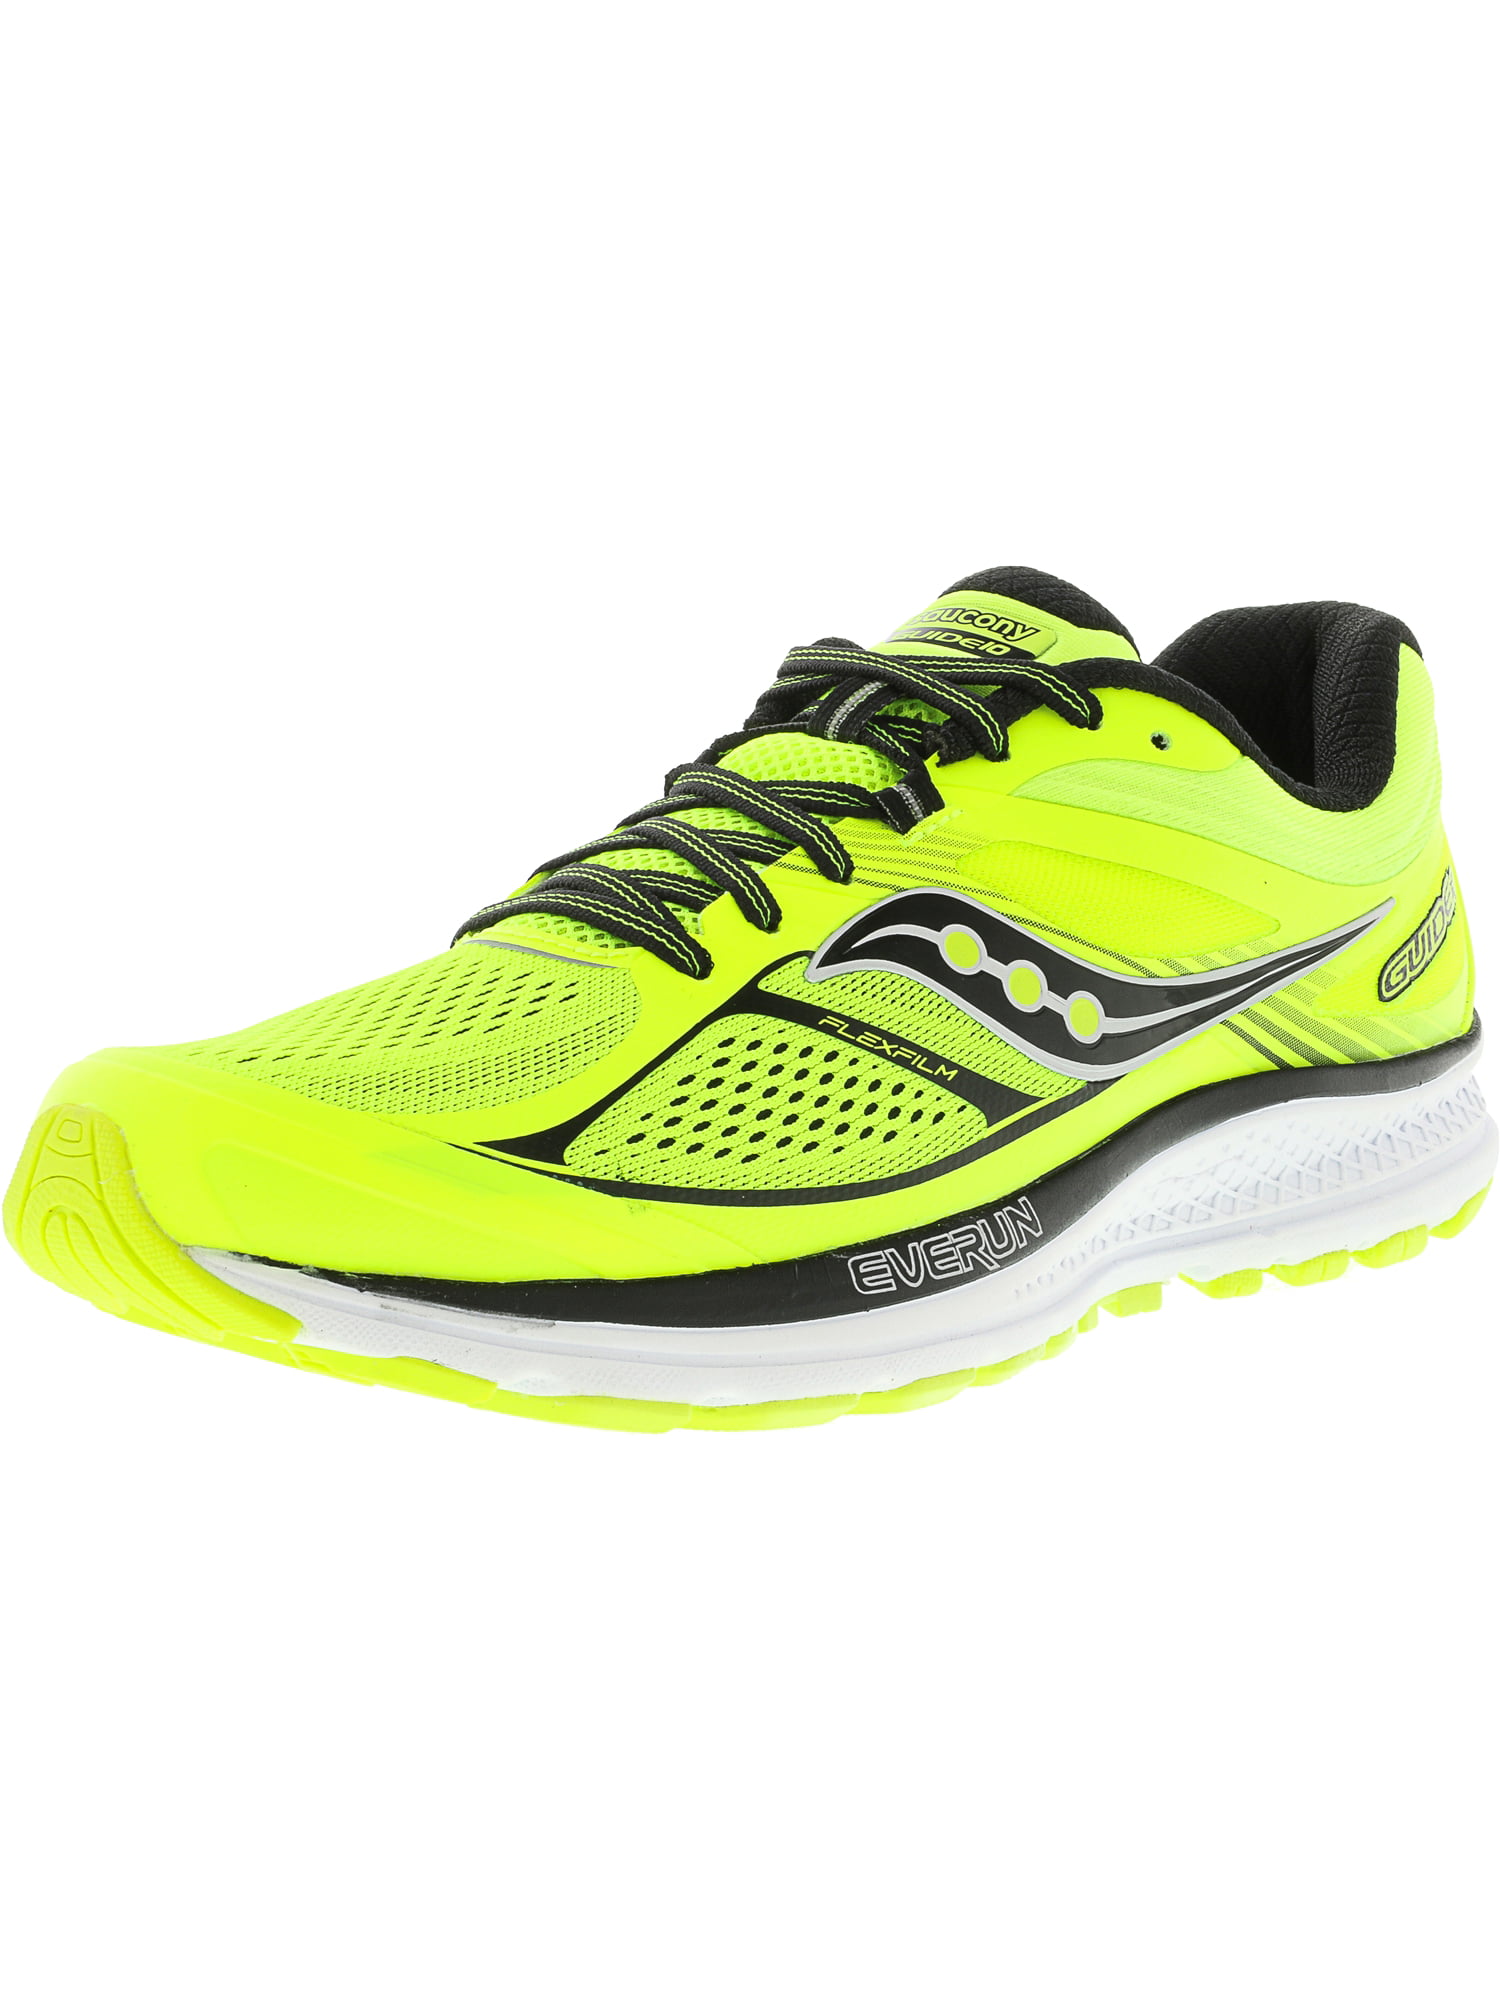 saucony men's guide 10 running shoes